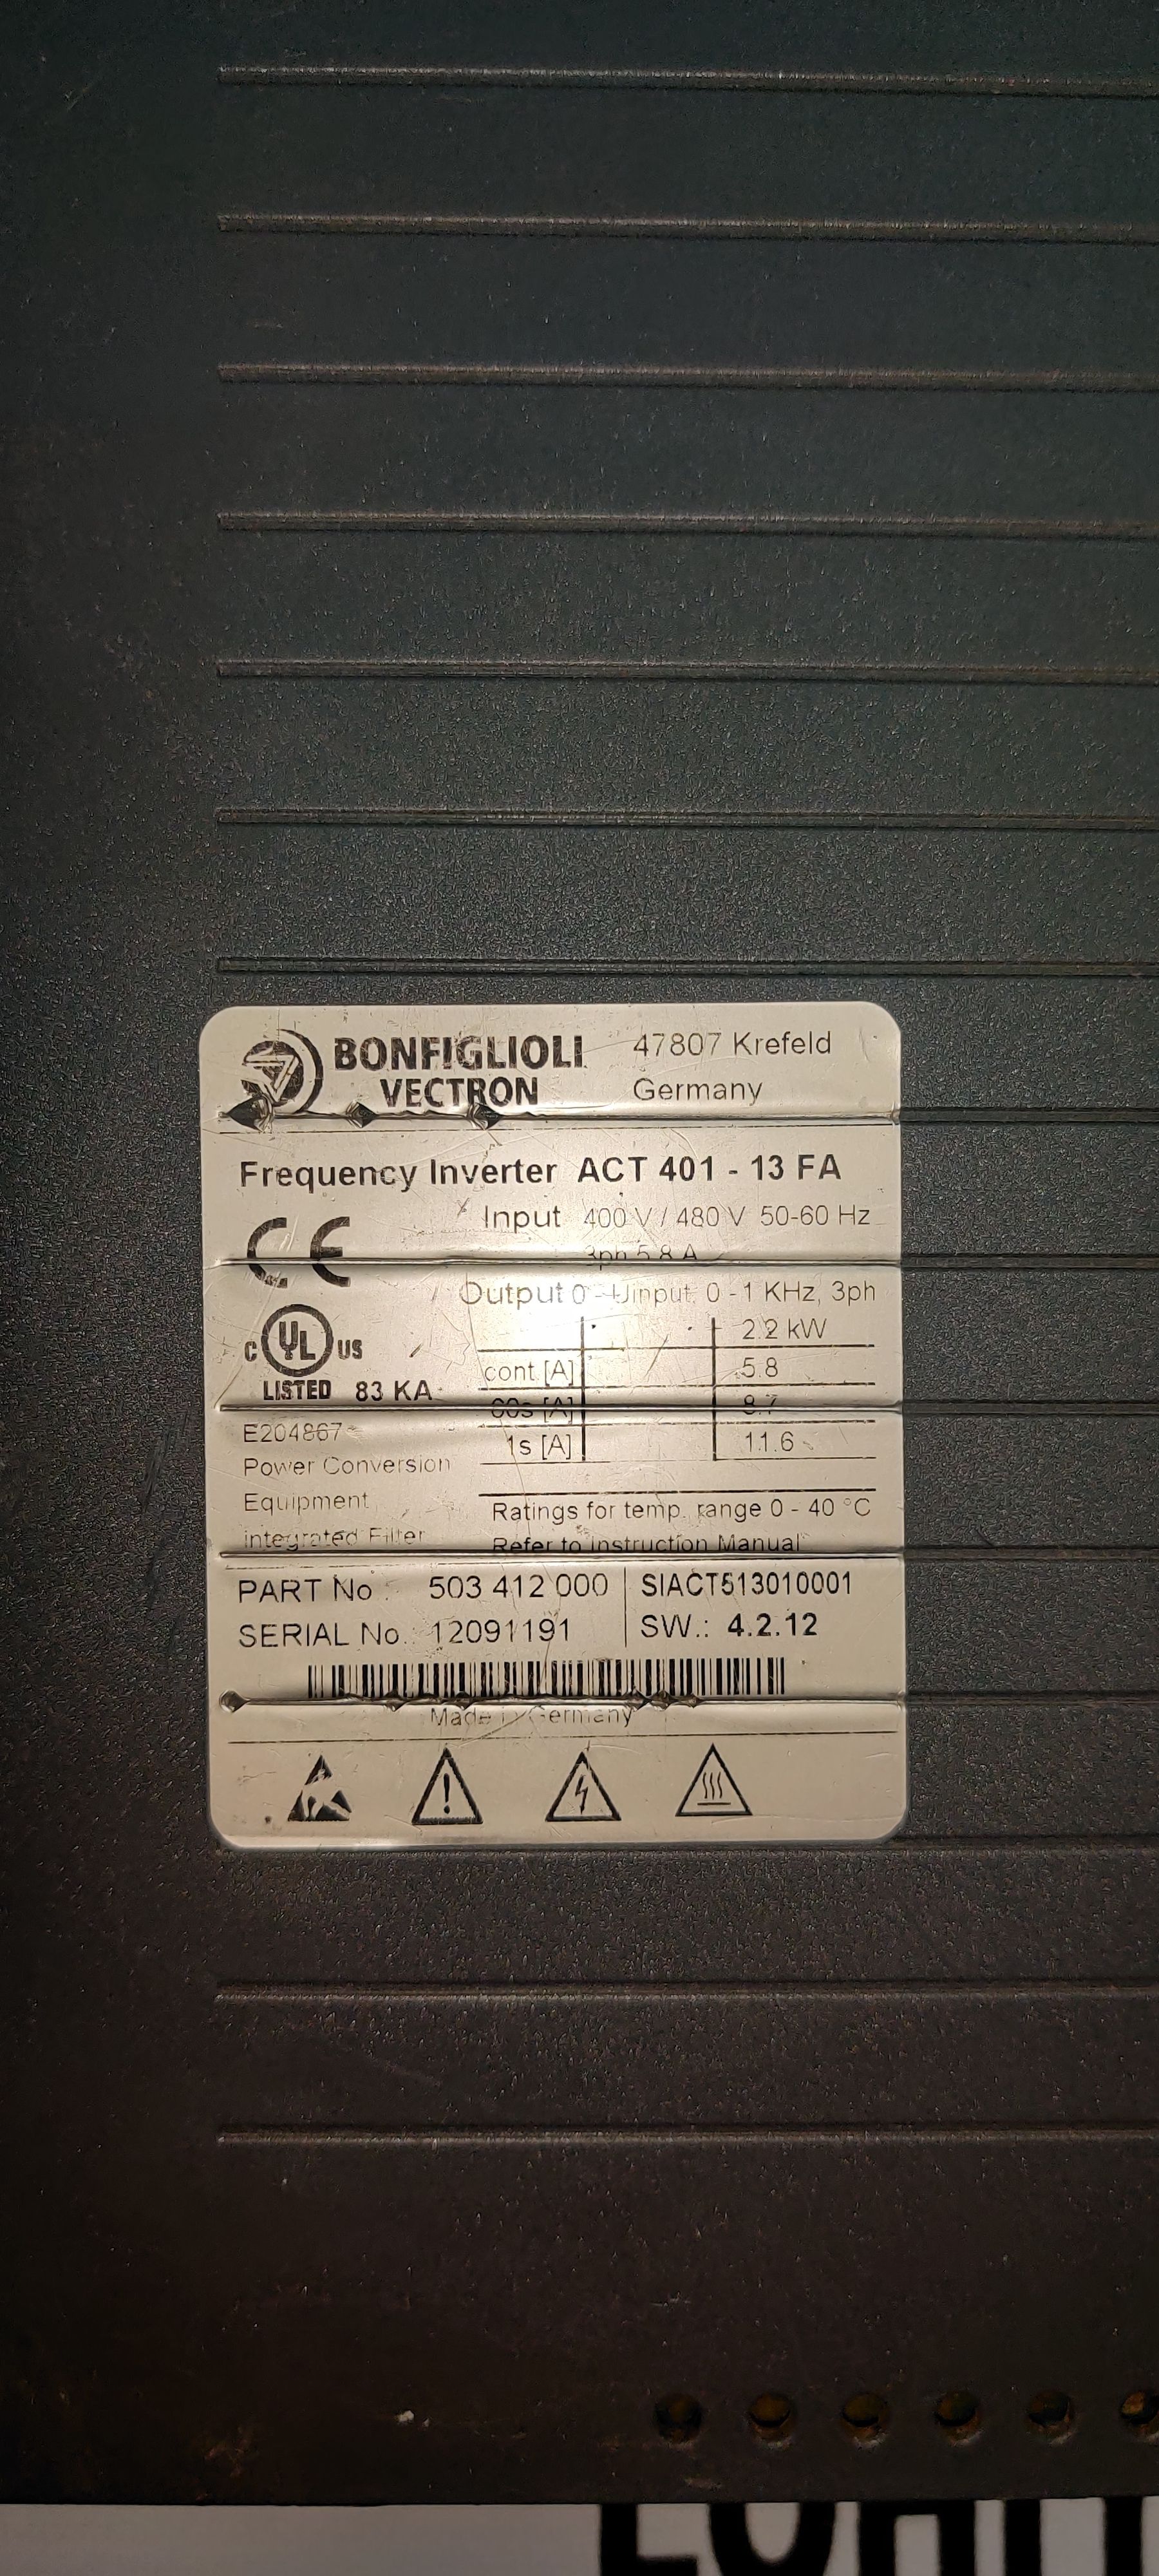 BONFIGLIOLI VECTRON ACT 401-13 FA 503 412 000 FREQUENCY INVERTER-ACTIVE DRIVE